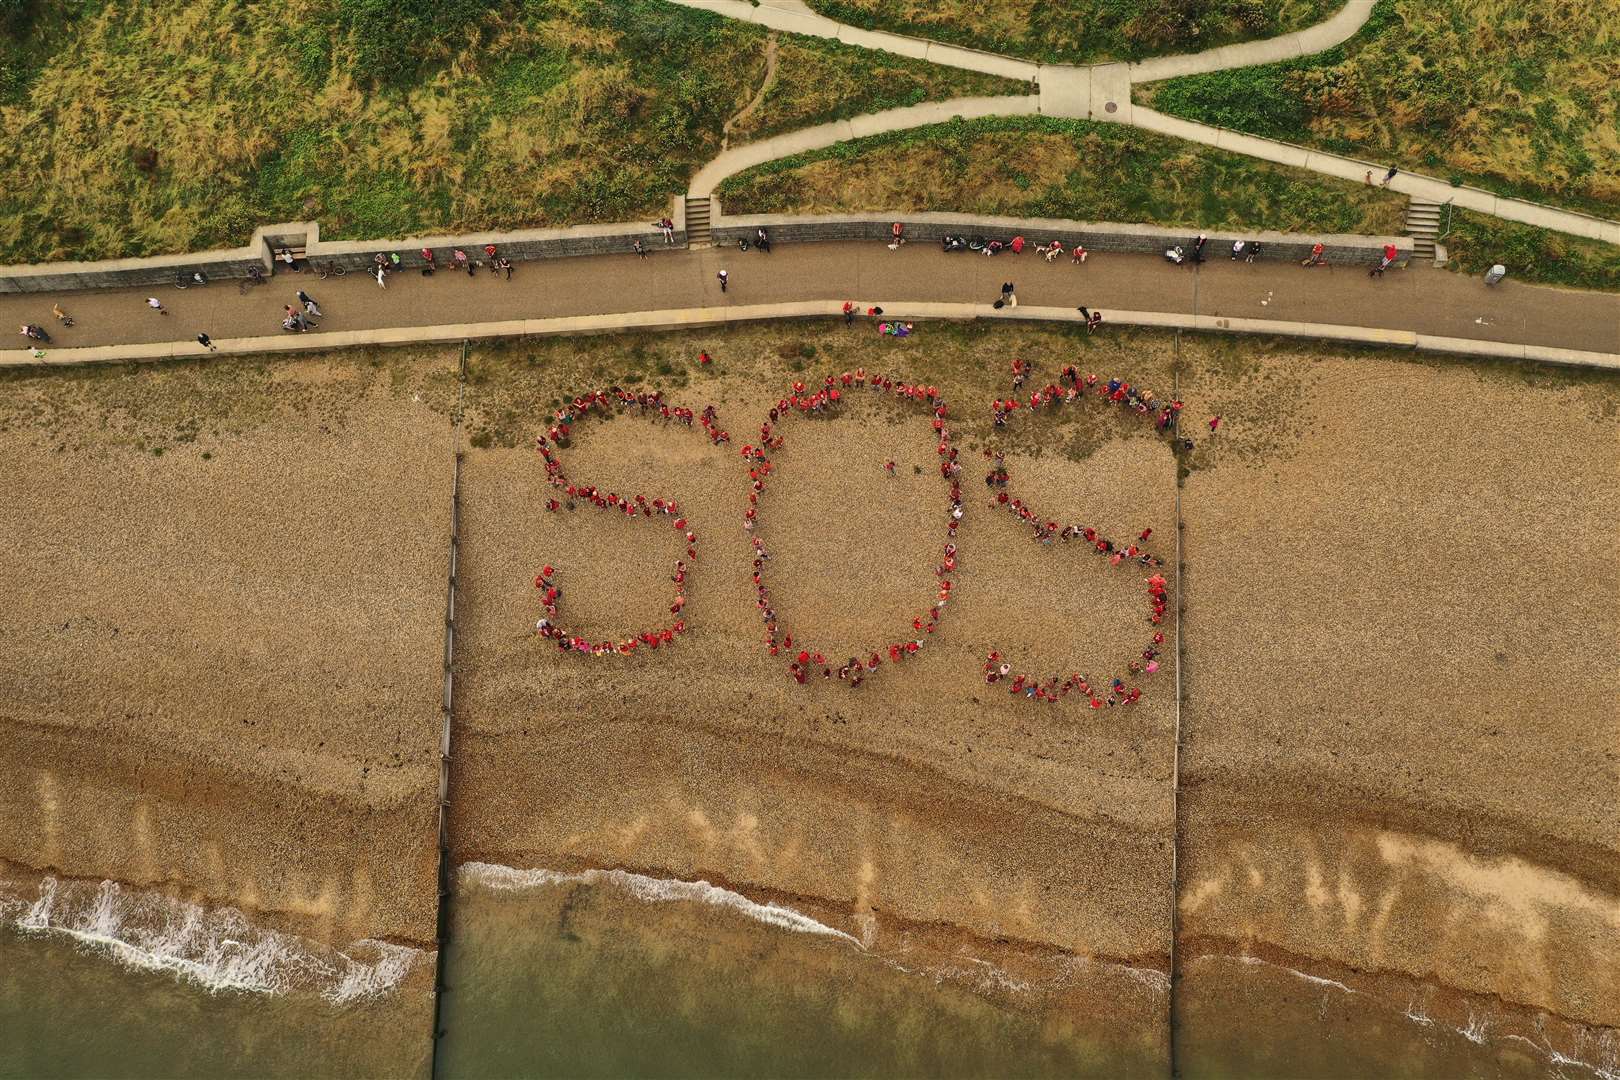 SOS Whitstable protest at Tankerton beach last month against Southern Water waste water and sewage releases. Picture: Tom Banbury @tombanbury